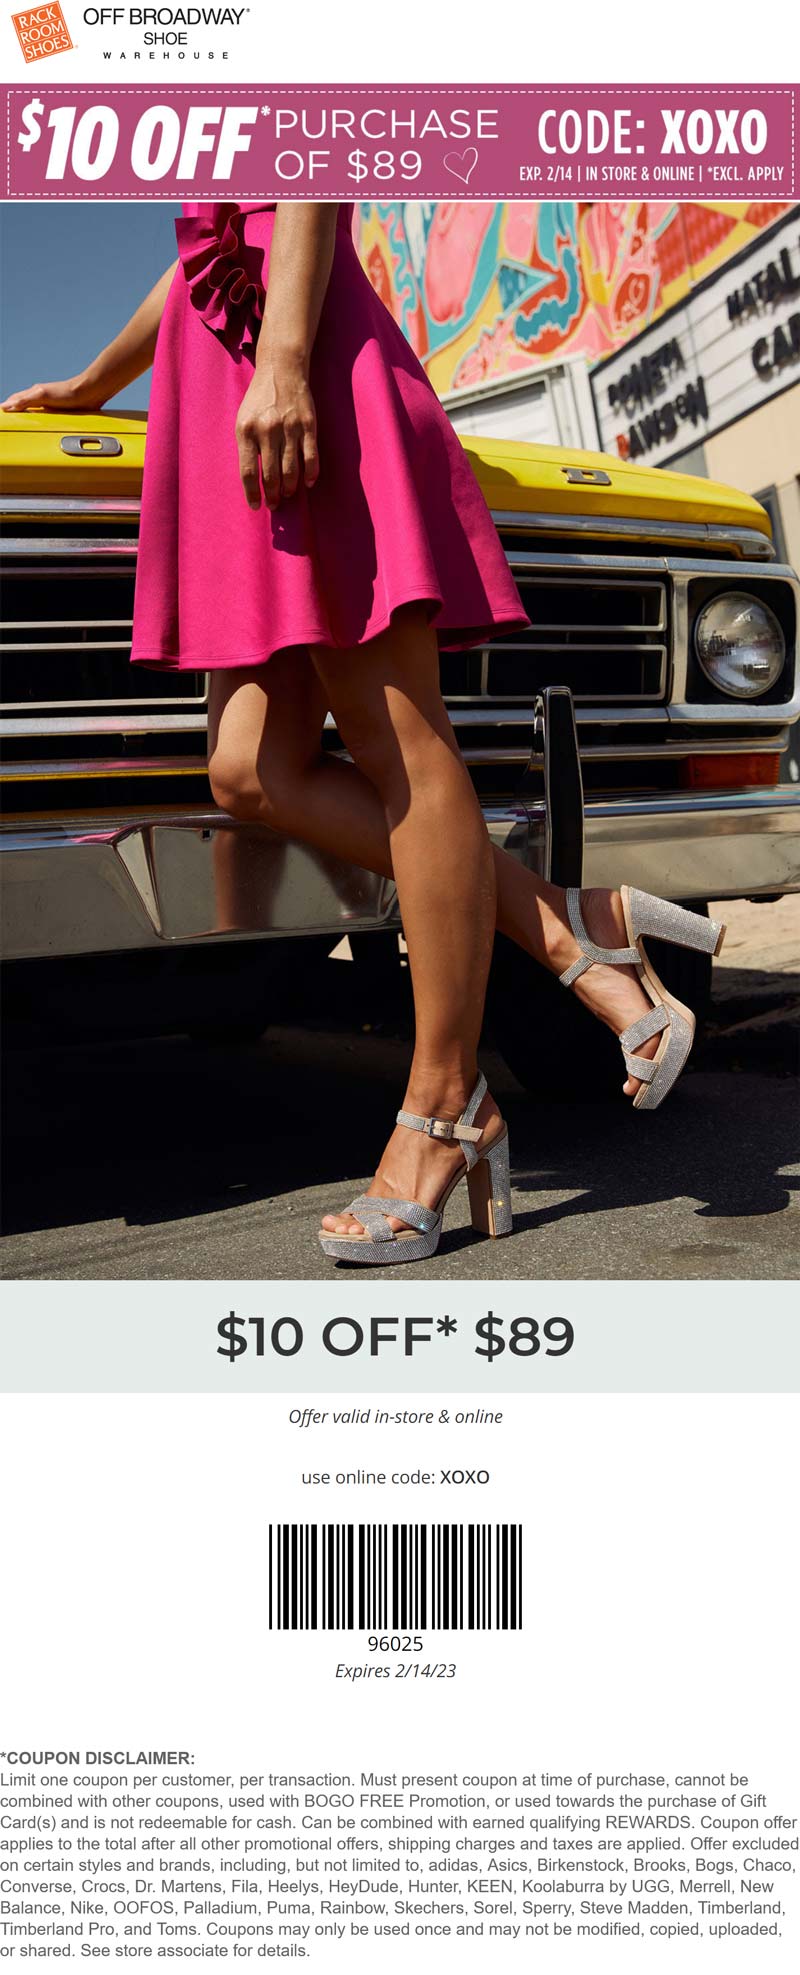 Off Broadway Shoe stores Coupon  $10 off $89 at Rack Room and Off Broadway Shoe Stores, or online via promo code XOXO #offbroadwayshoe 